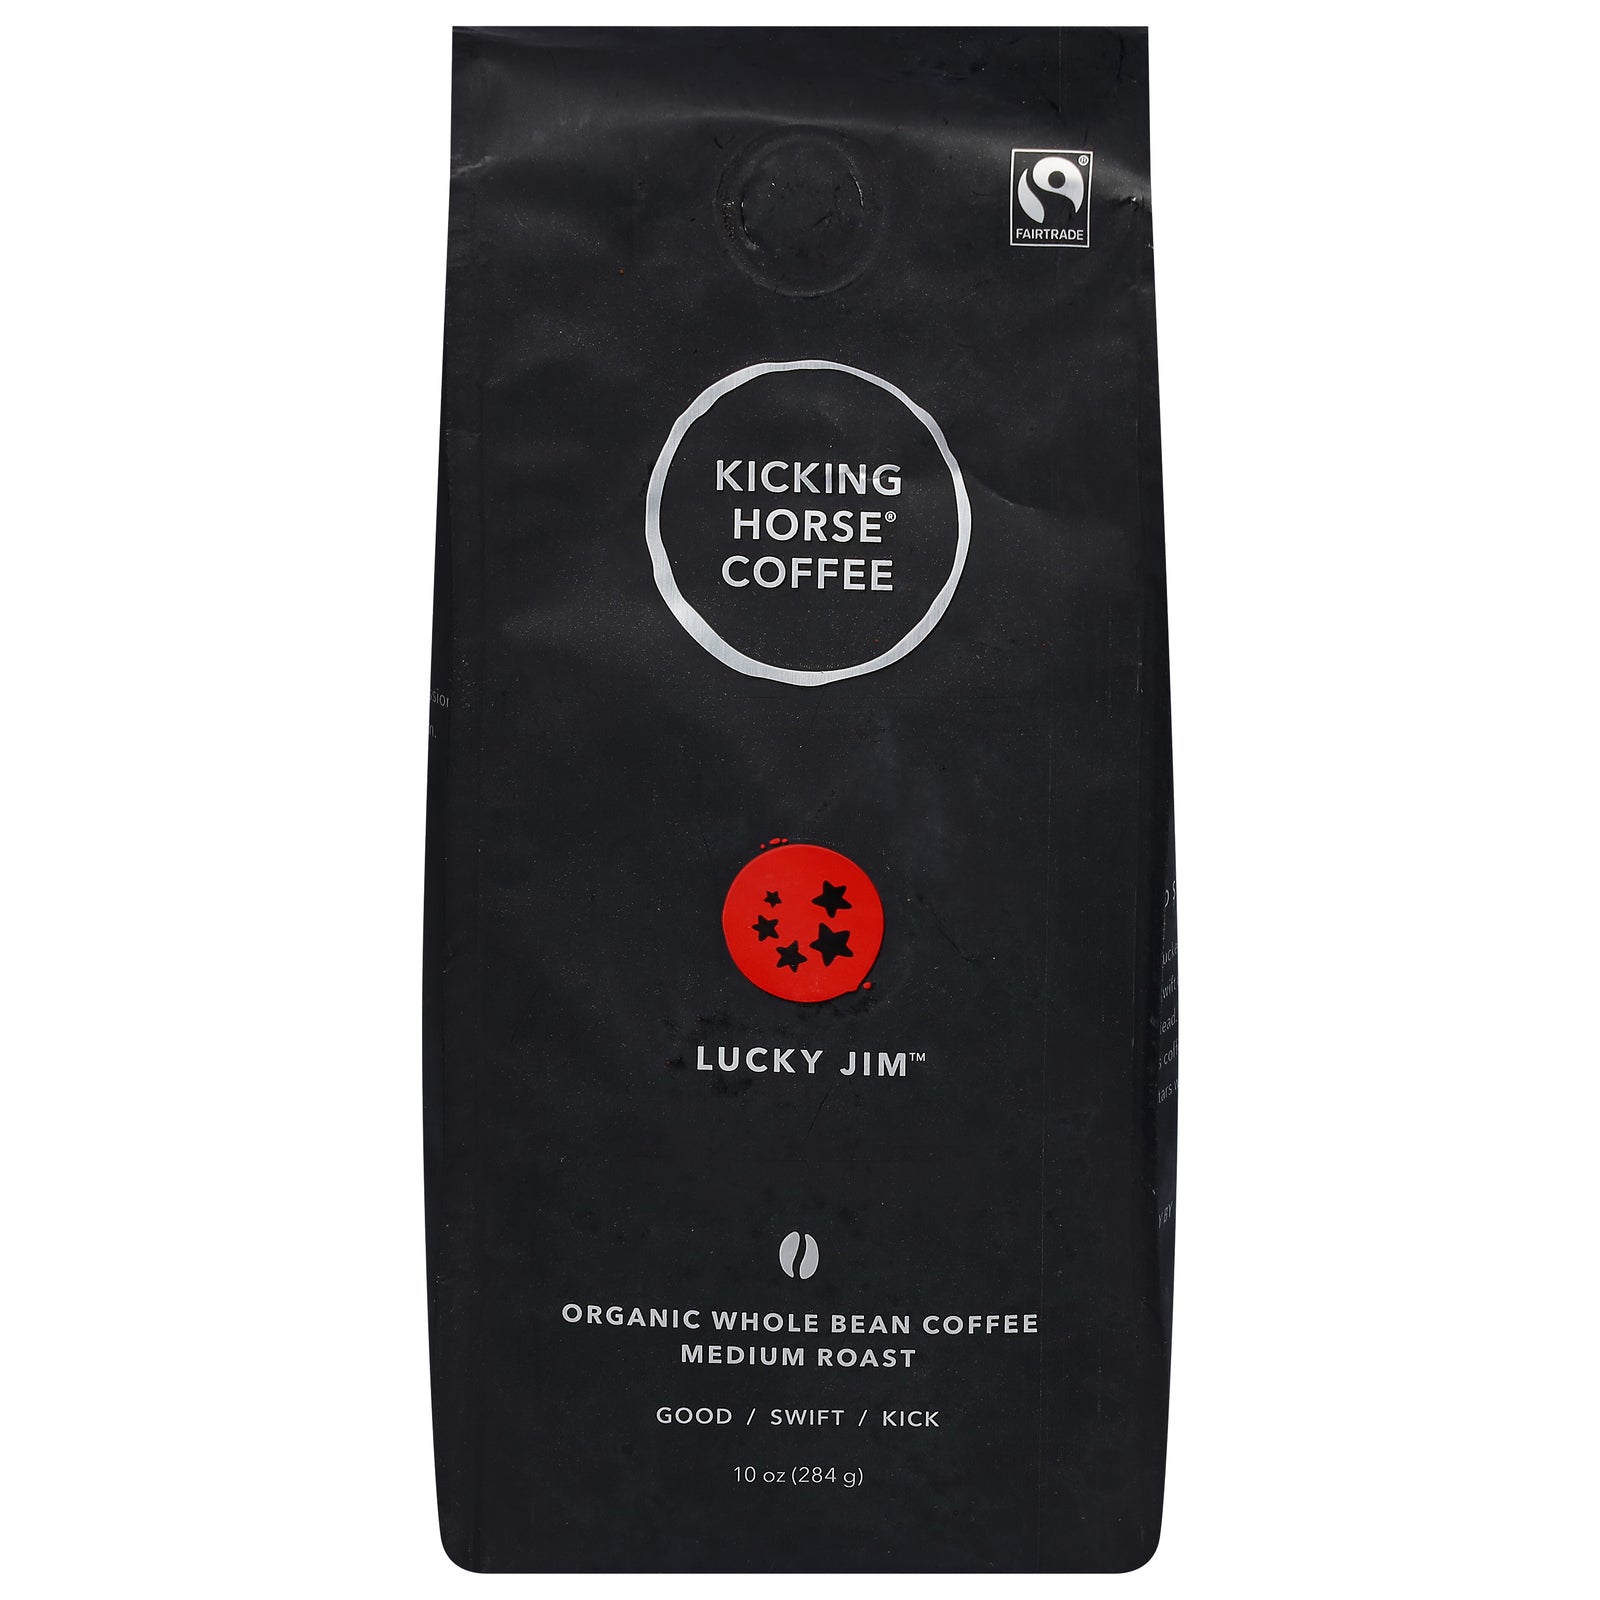 Kicking Horse - Coffee Lucky Jim Whole Bn - Case of 6-10 OZ